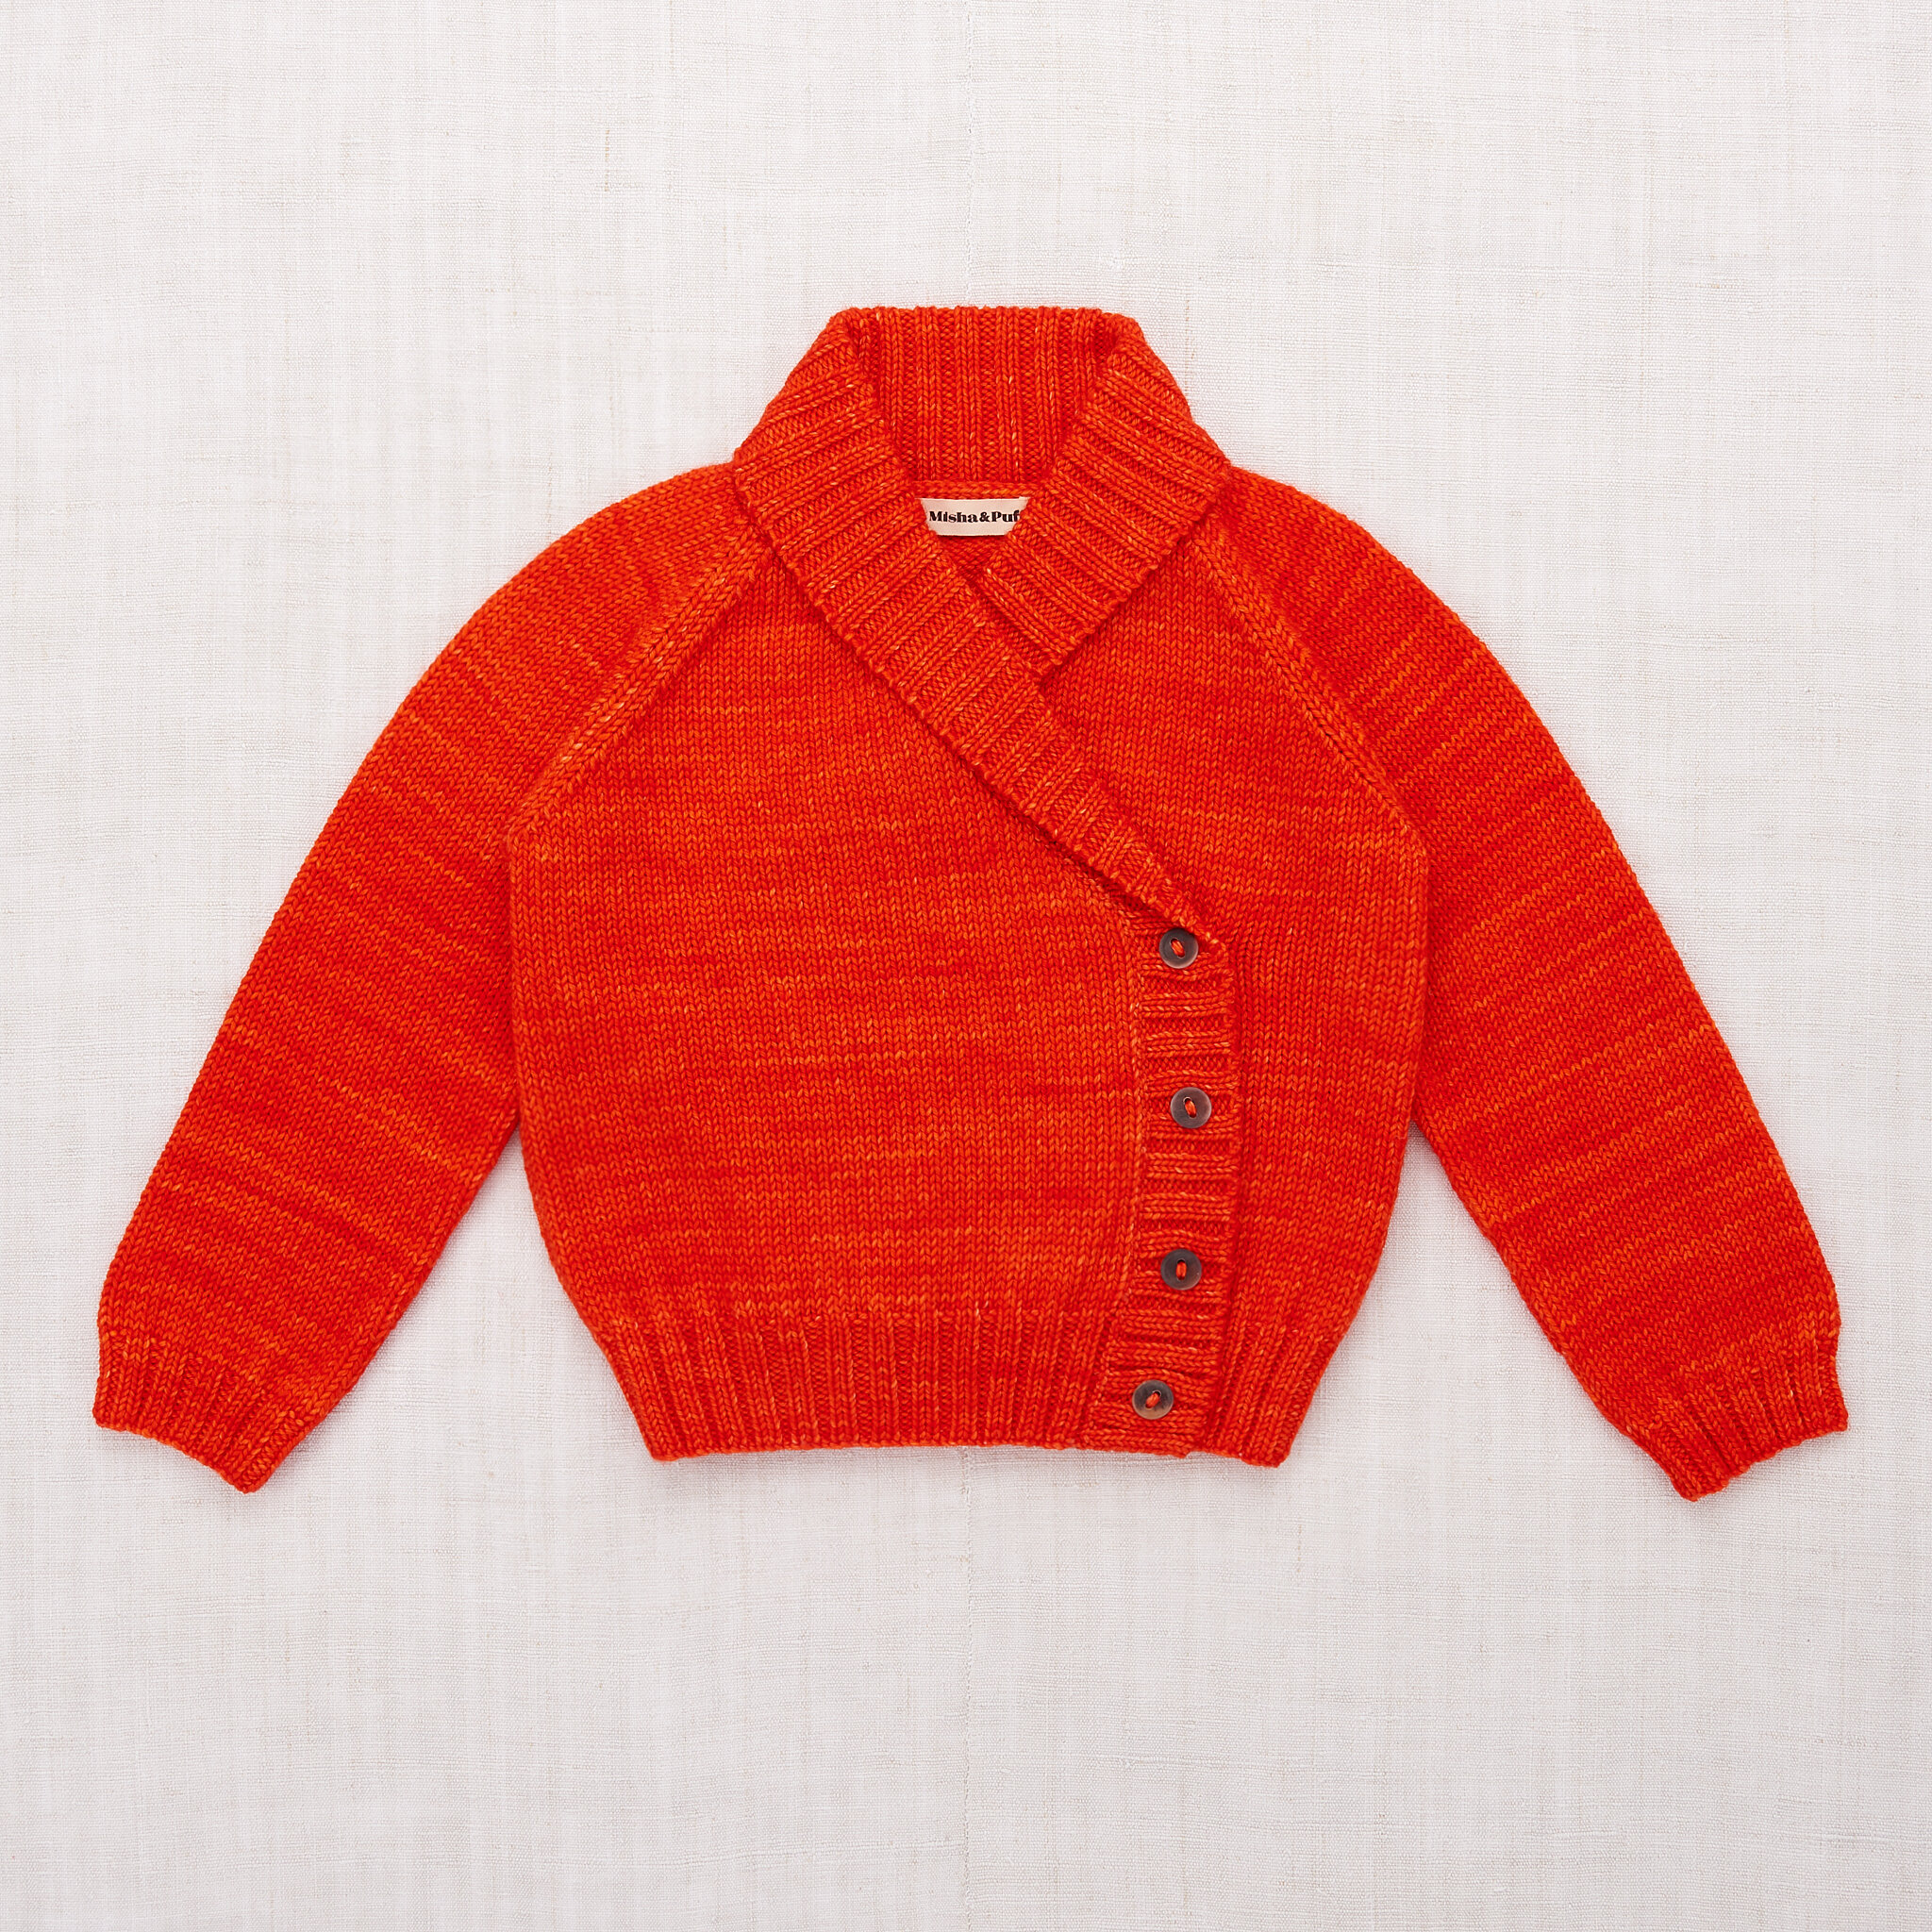 misha-and-puff-saltwater-cardigan-hot-red_01.jpg